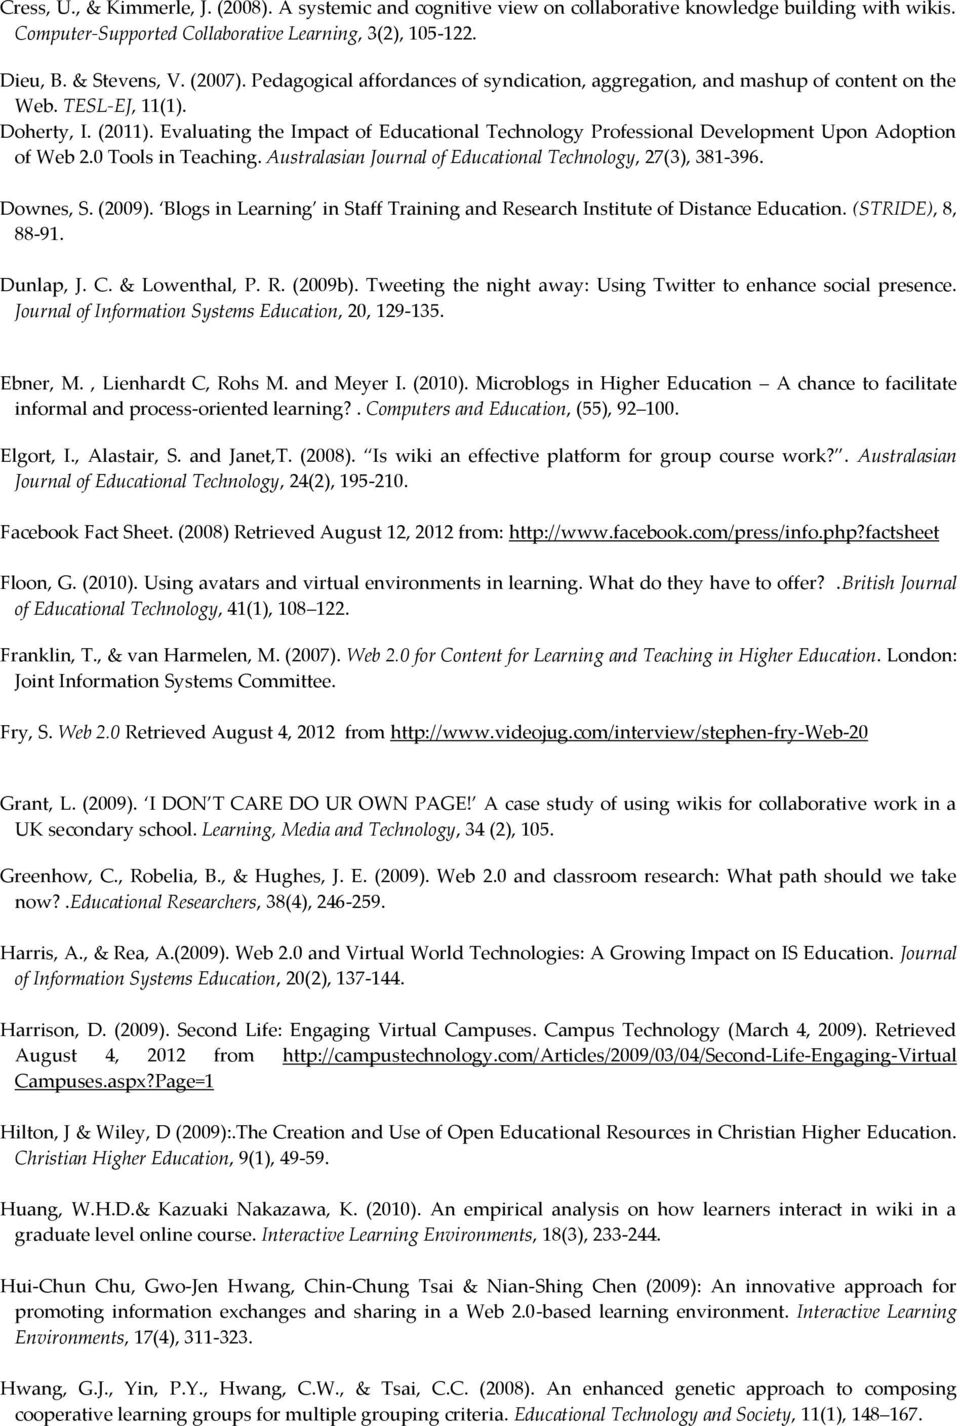 Evaluating the Impact of Educational Technology Professional Development Upon Adoption of Web 2.0 Tools in Teaching. Australasian Journal of Educational Technology, 27(3), 381-396. Γτwσκs, Σ.